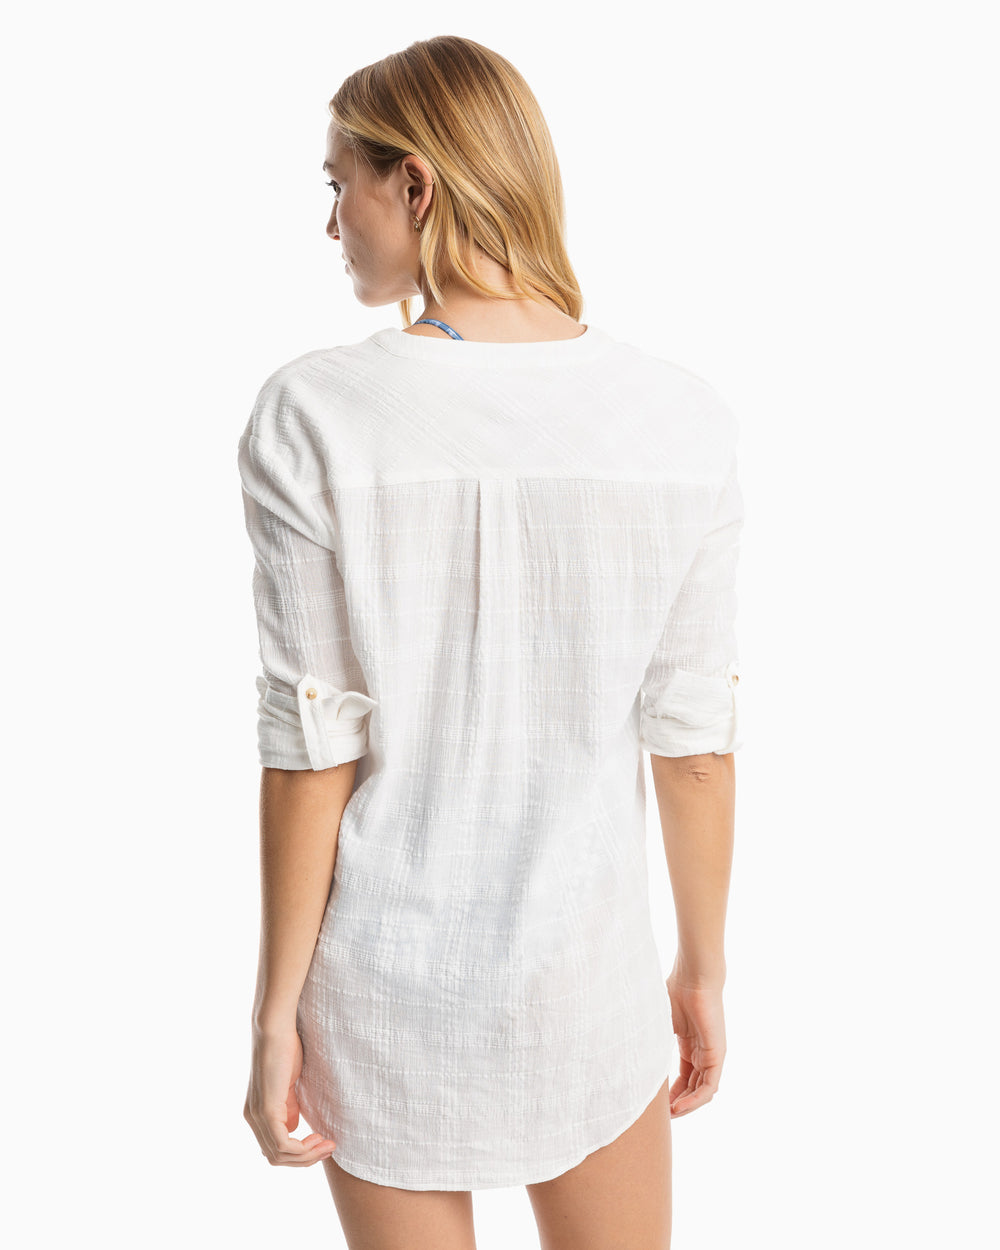 The model back view of the Women's Marnee Textured Tunic by Southern Tide - Classic White